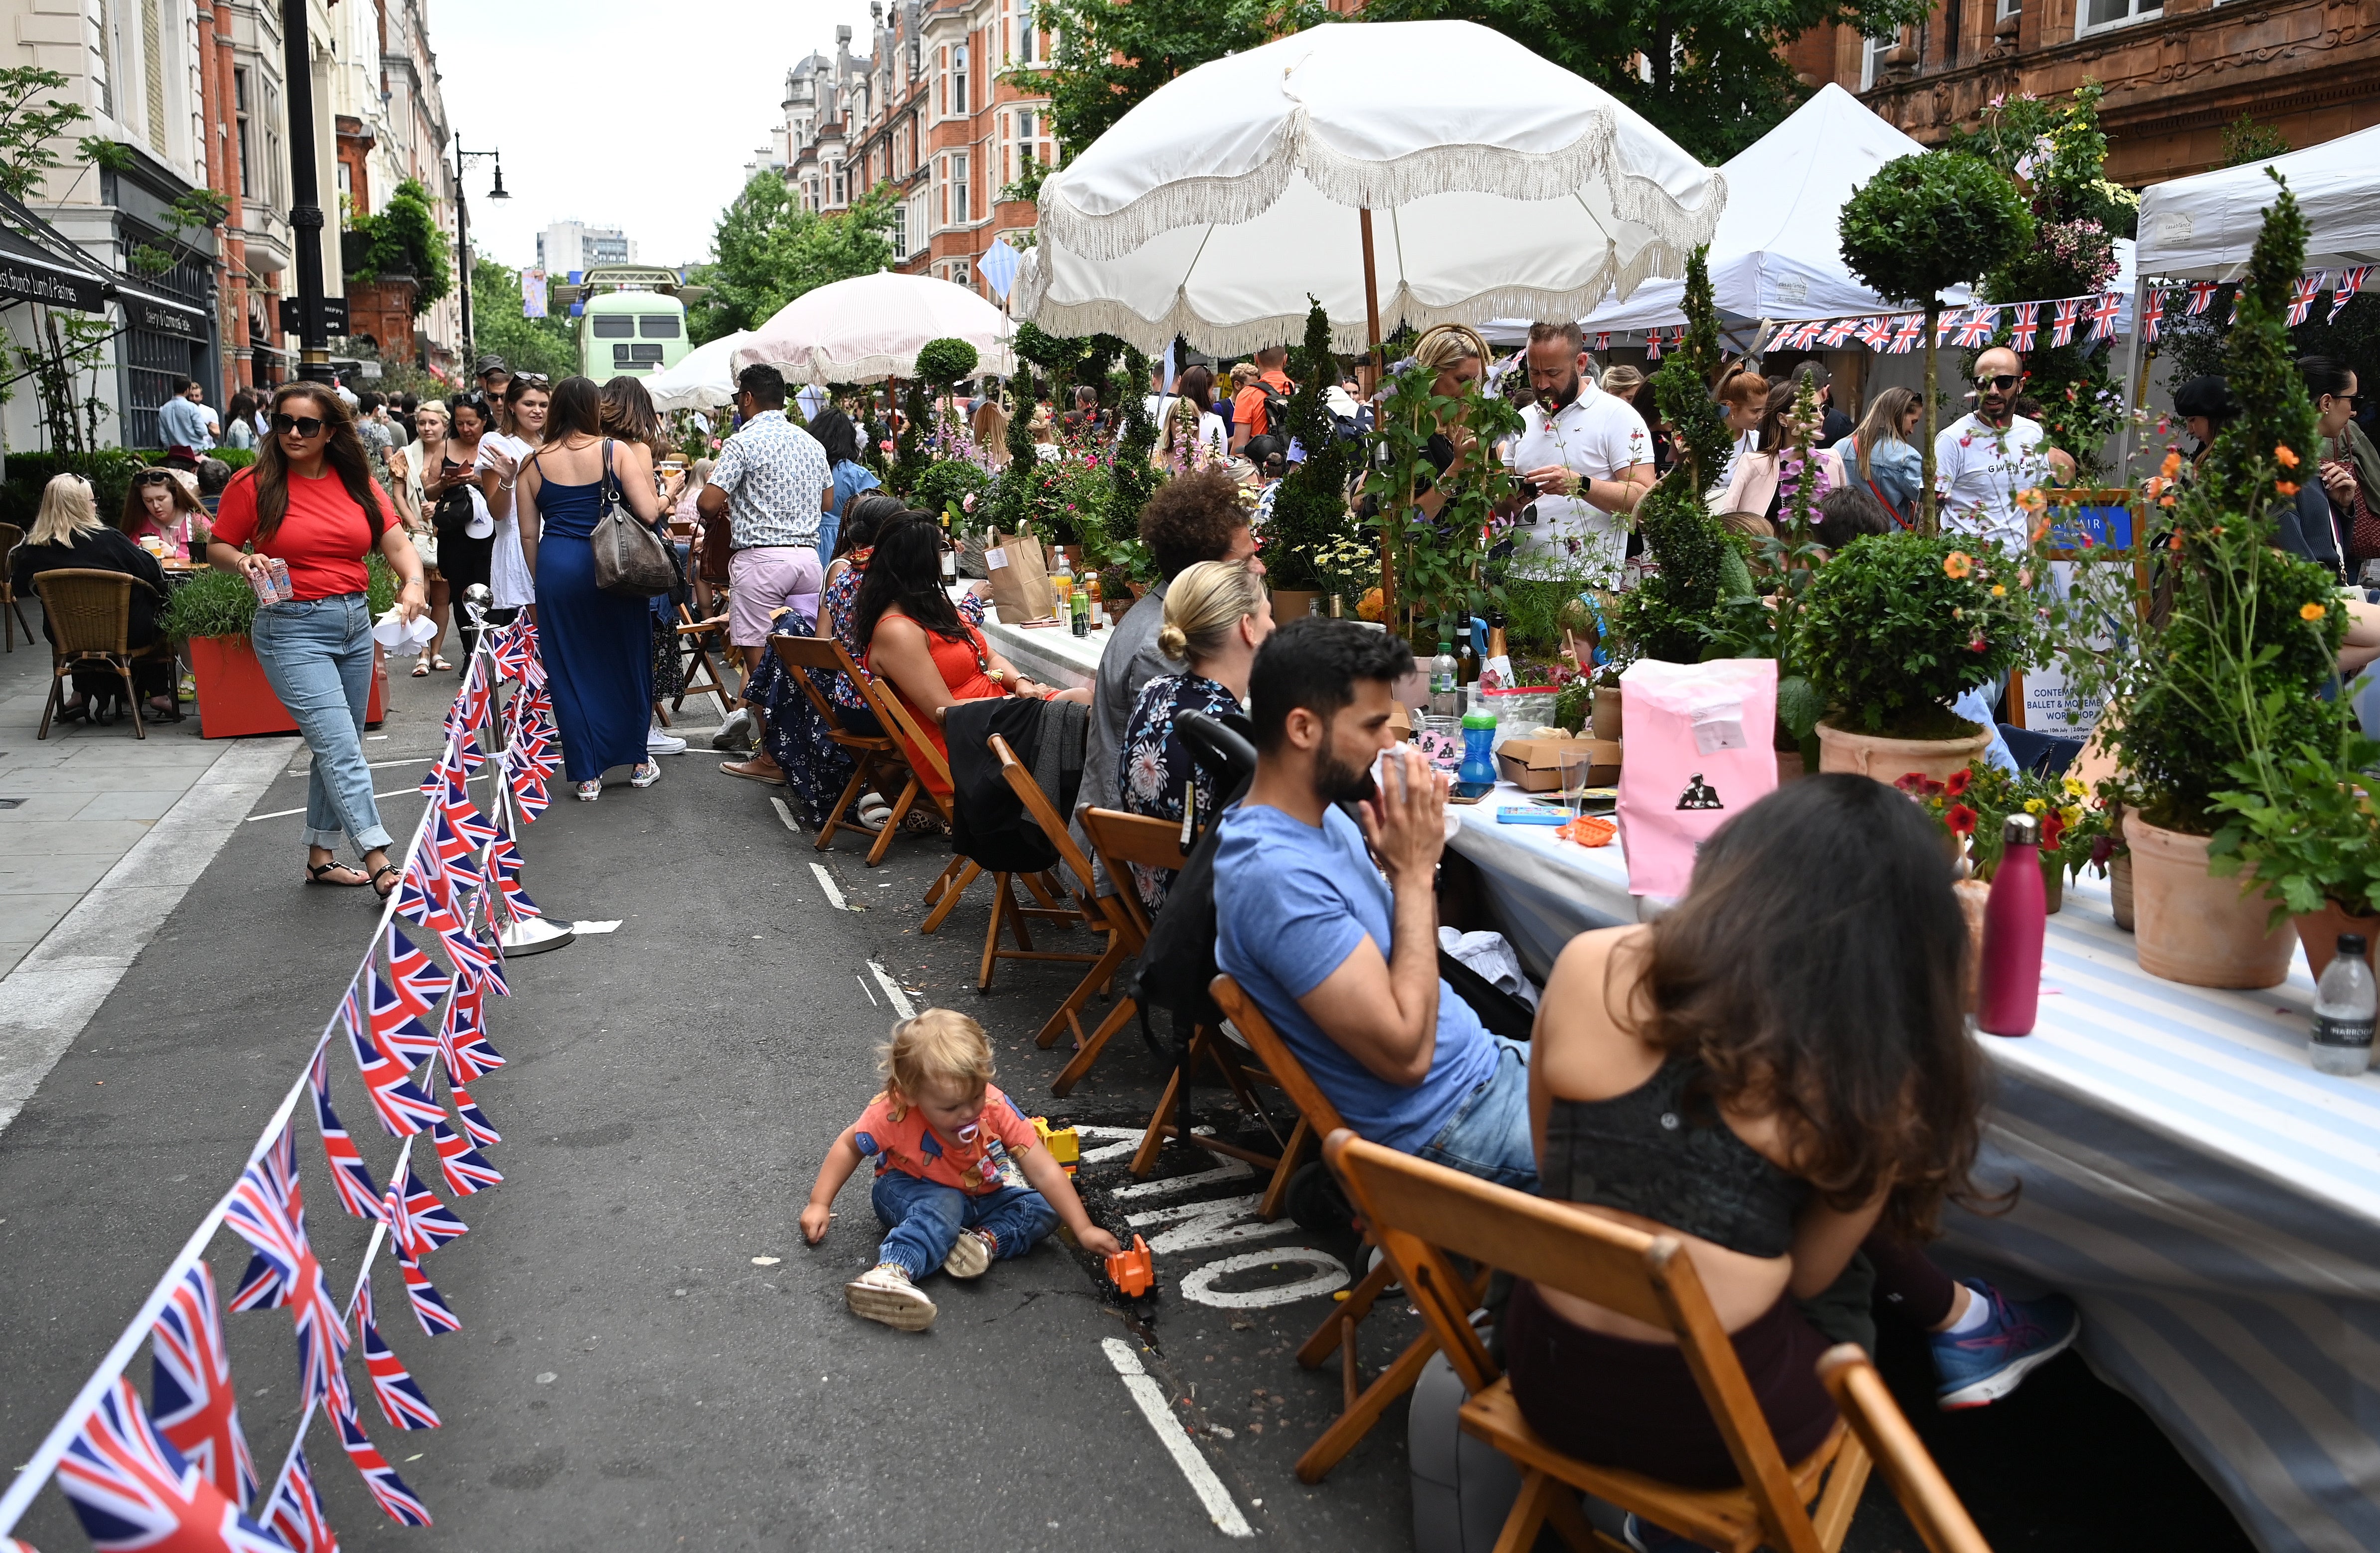 Up to 10 million people are expected to attend street parties across the UK on Sunday